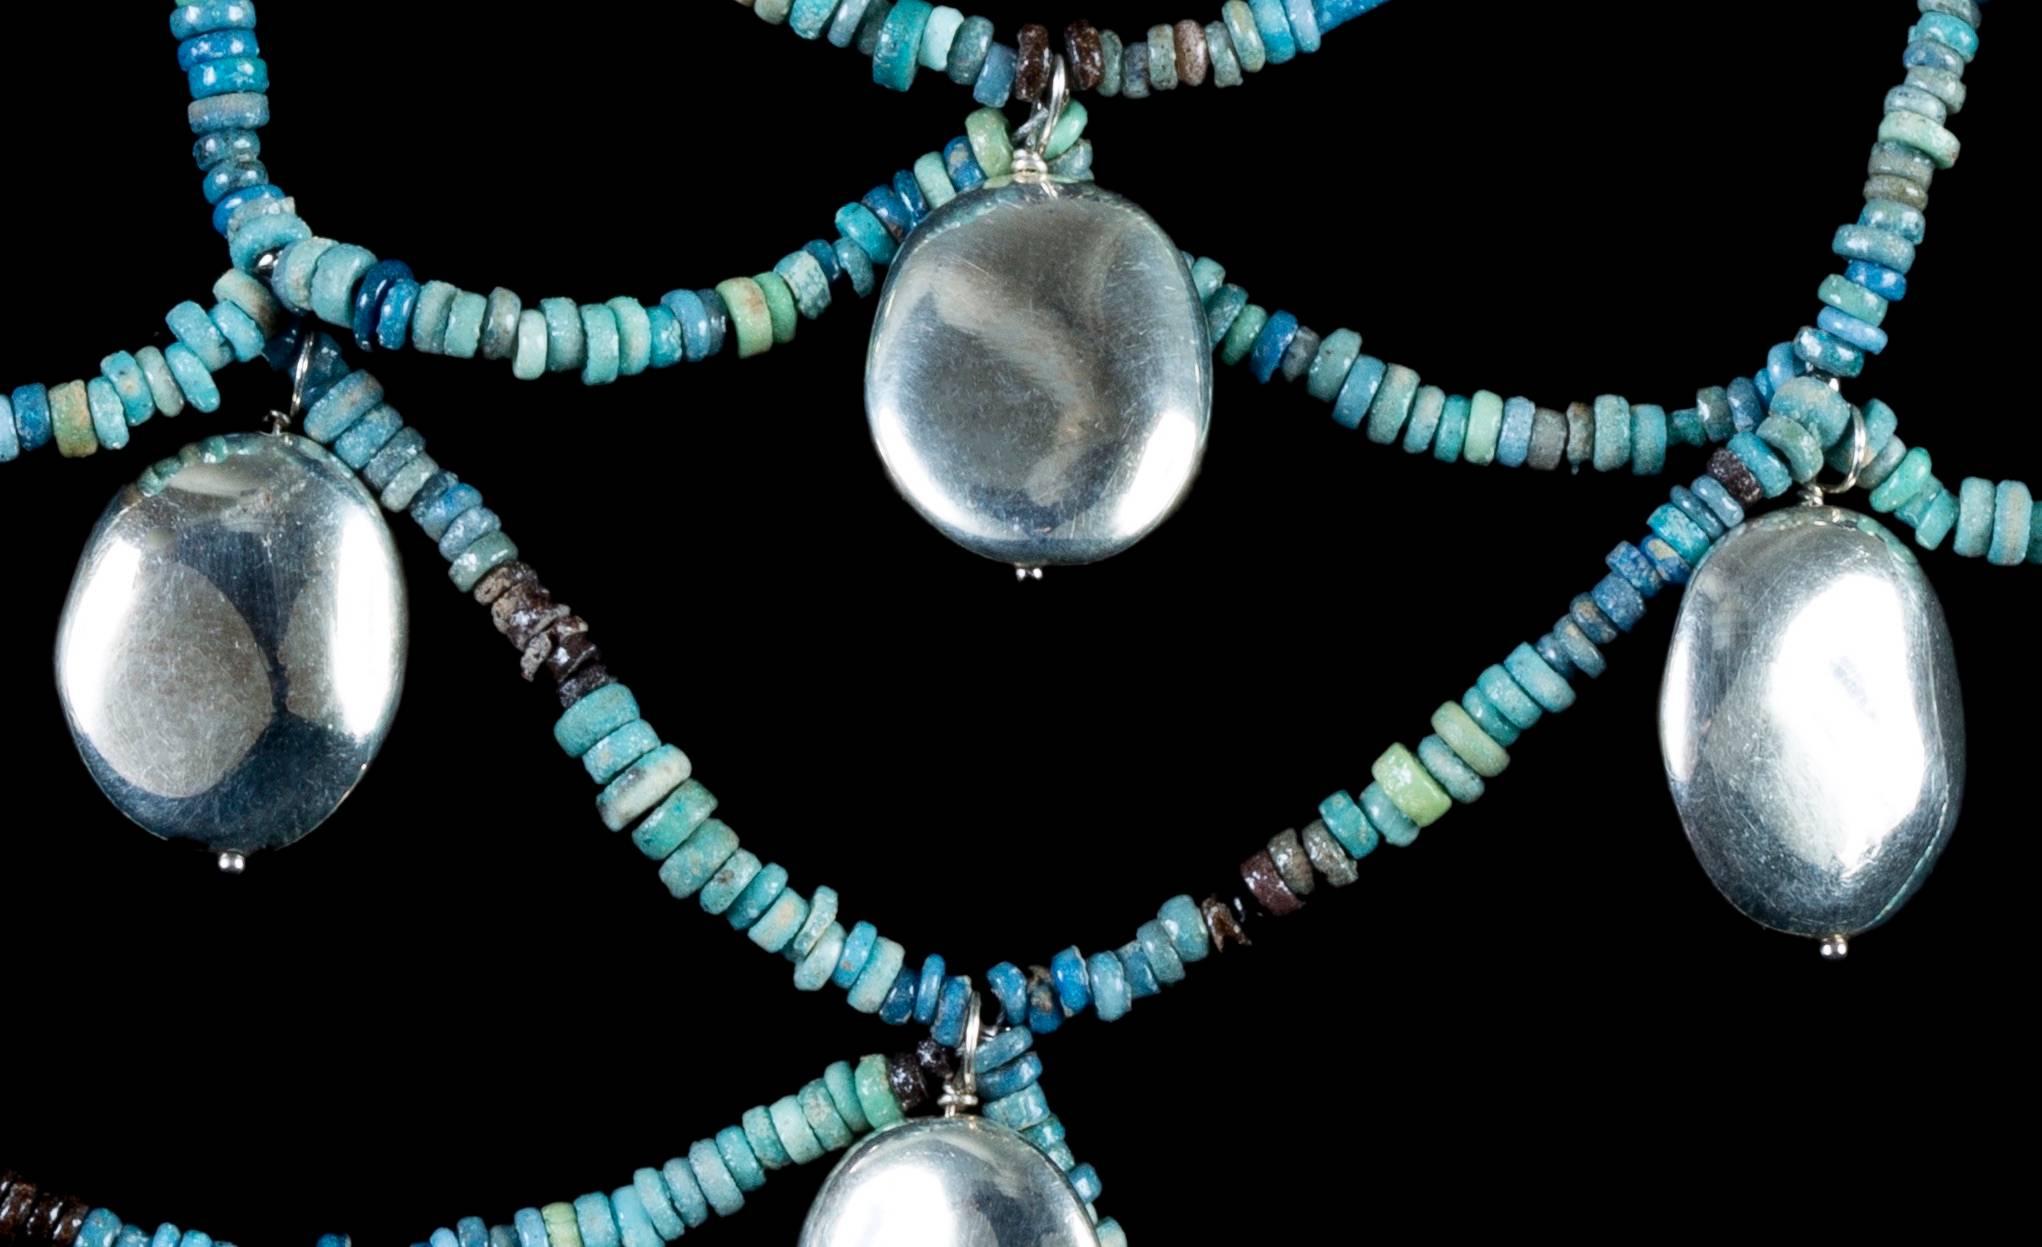 Silver bangles peek between the hollows of this woven necklace boasting stand upon strand of authentic Egyptian beads (Ca. 712-343 BC). Modern new string and clasp.

This piece comes from our 